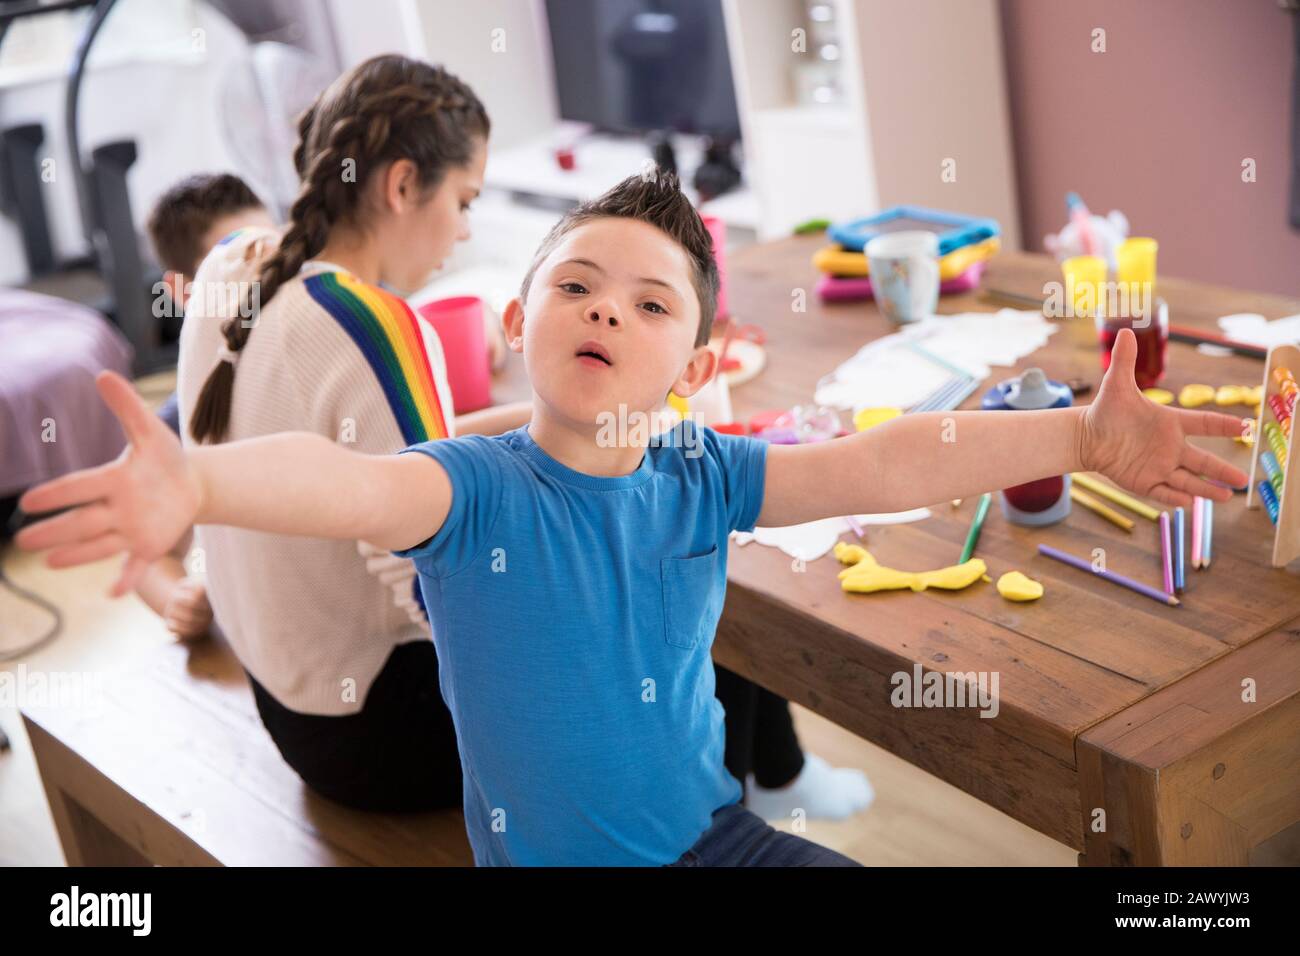 Portrait playful boy with Down Syndrome playing at dining table Stock Photo